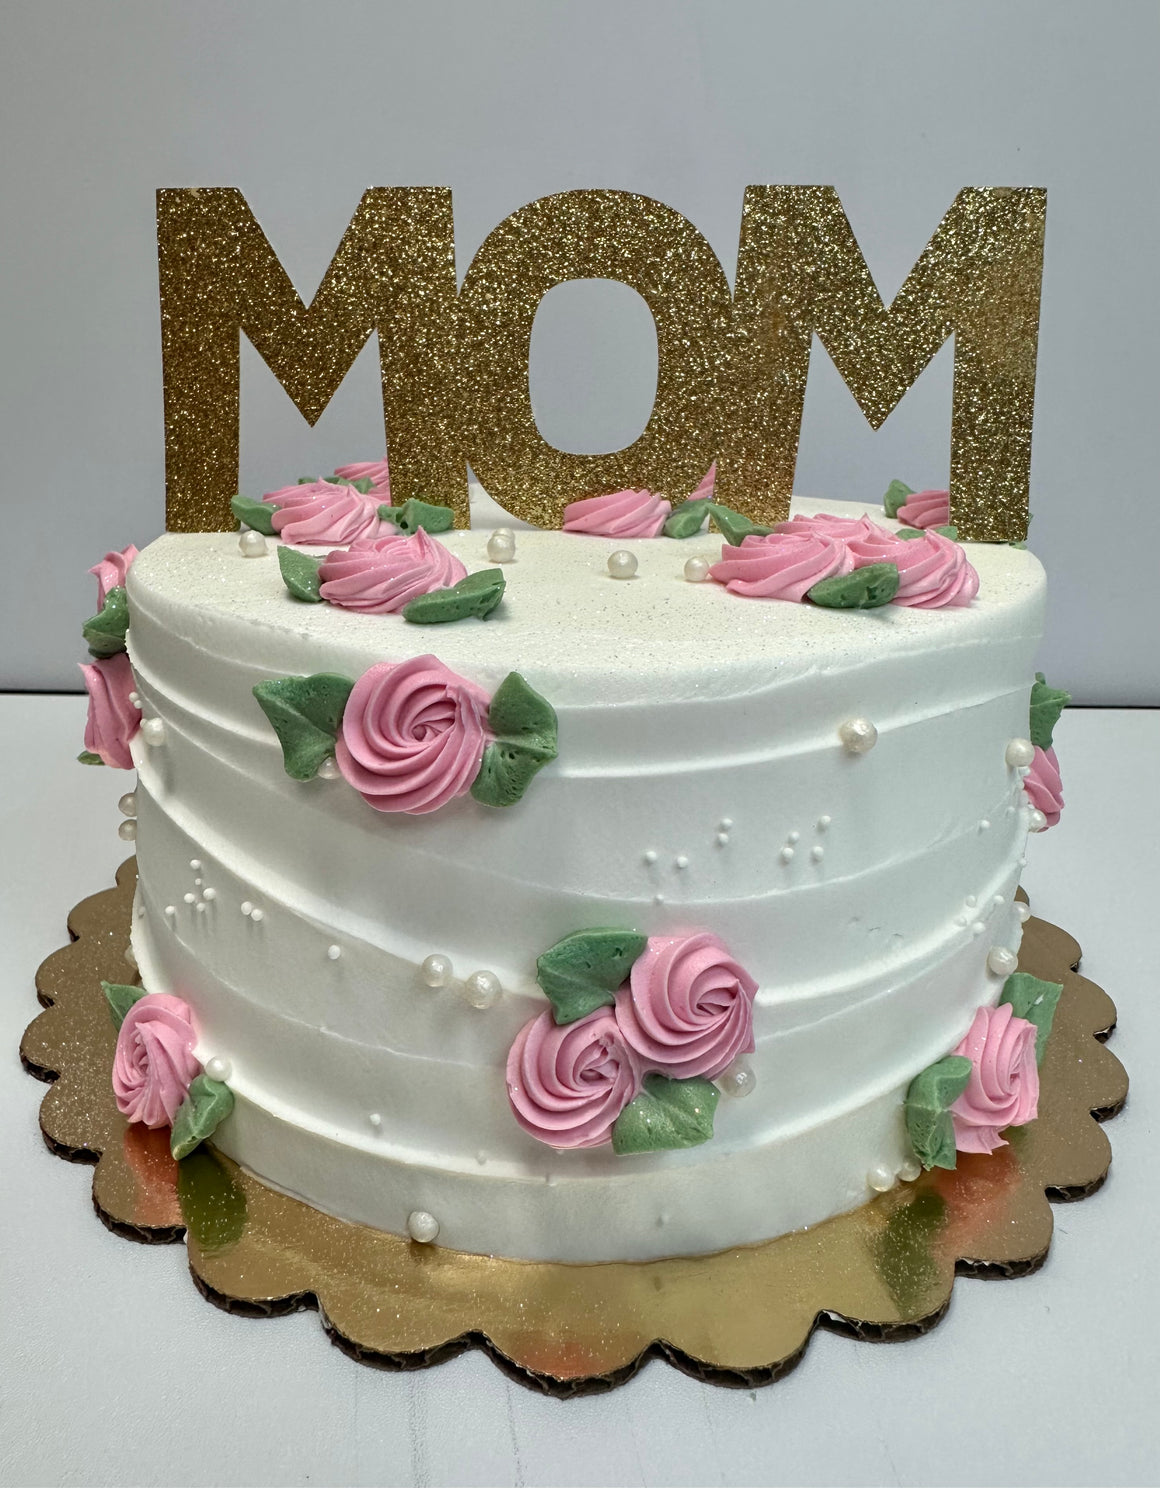 Decorated Mother's Day Cake - 6" - "Pearl Rosette Theme"